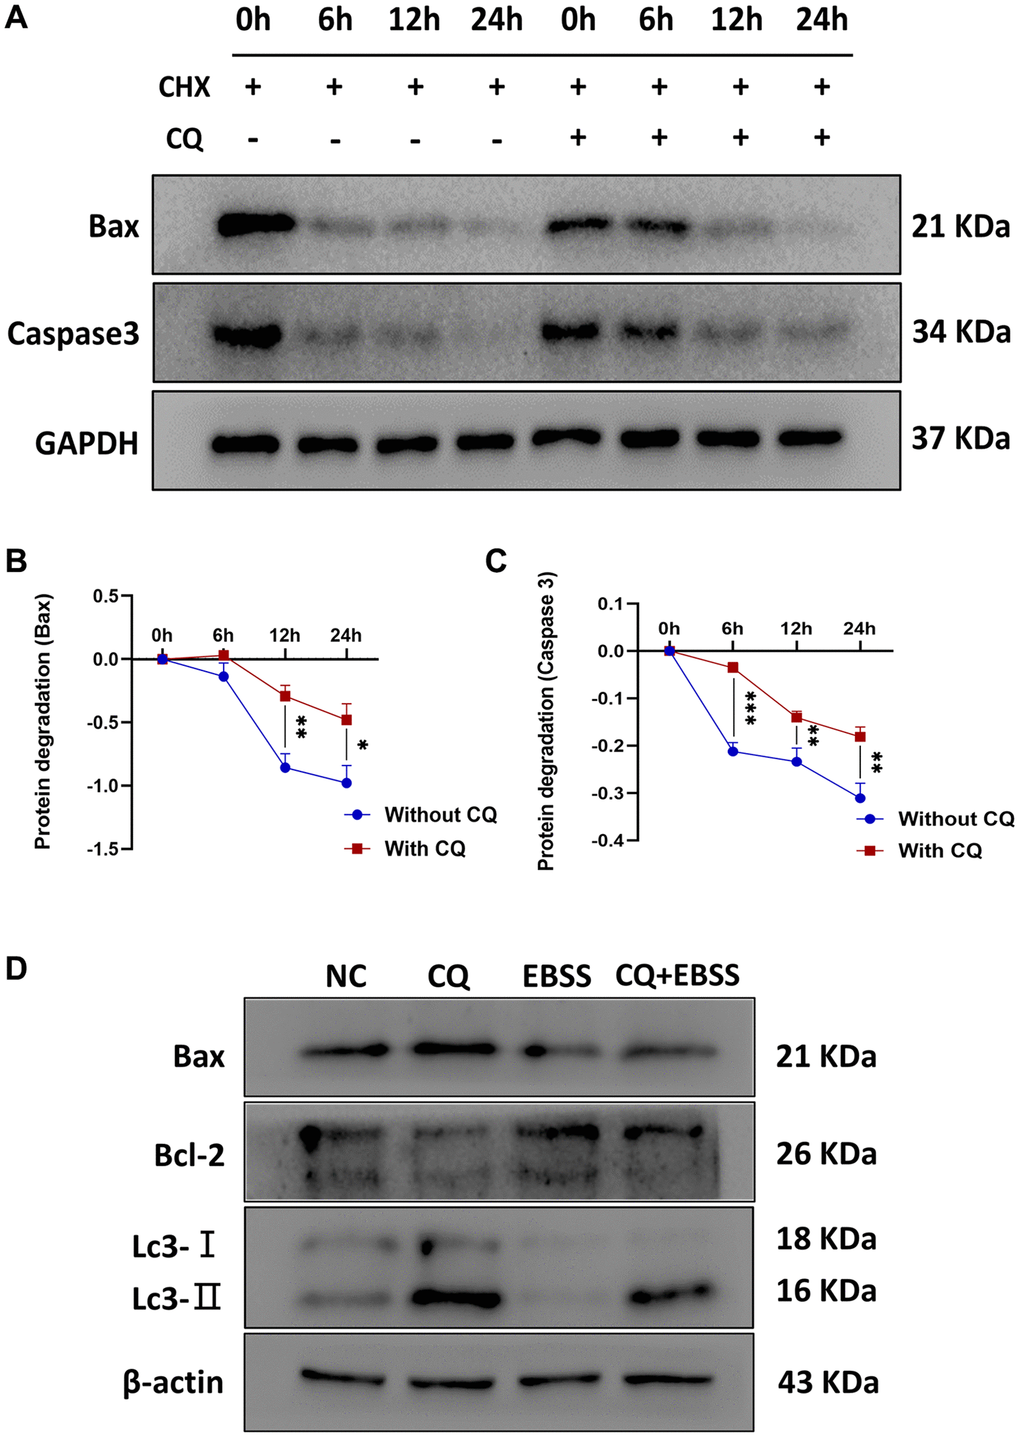 CQ reduced the protein degradation of Bax and Caspase3, and CQ-induced apoptosis of OS cells was dependent on the lysosomal inhibition. The (A) Representative pictures from tumor cell western blot assay. (B) The graph is the quantified data of the western blot for the expression of BAX, and GAPDH was used as a load control (*p **p n = 3). (C) The graph is the quantified data of the western blot for the expression of Caspase3, and GAPDH was used as a load control (**p ***p n = 3). (D) Representative pictures from 143B cells western blot assay and the cells were treated with PBS, 20 μM CQ, EBSS, or the combination of CQ and EBSS. The data were expressed as the mean ± SD.